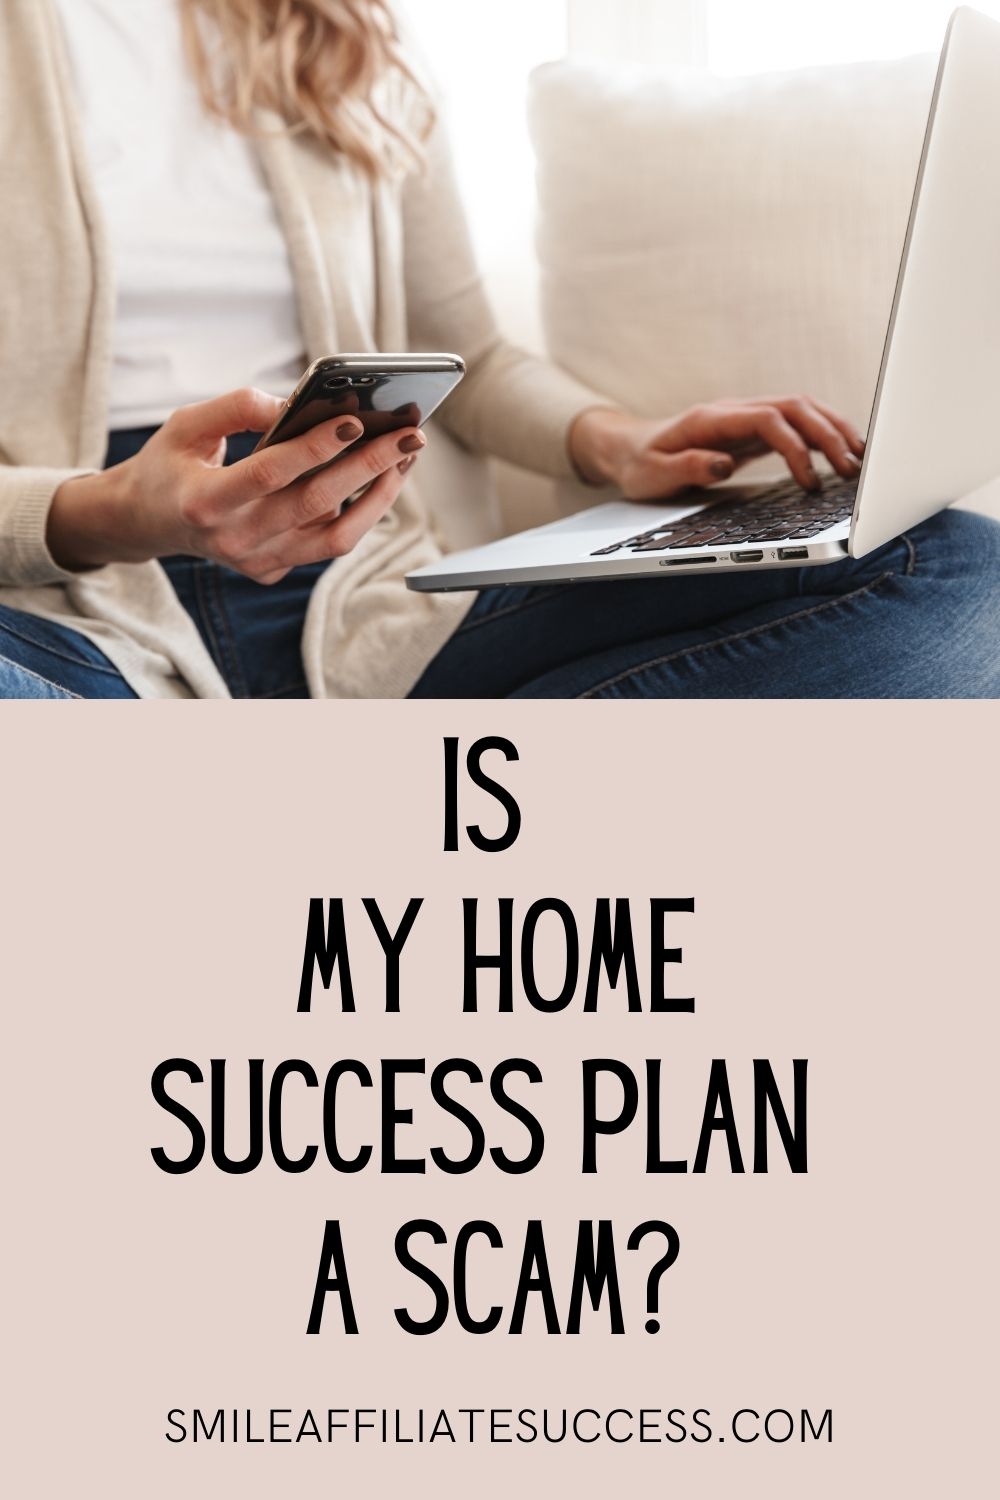 Is My Home Success Plan A Scam?